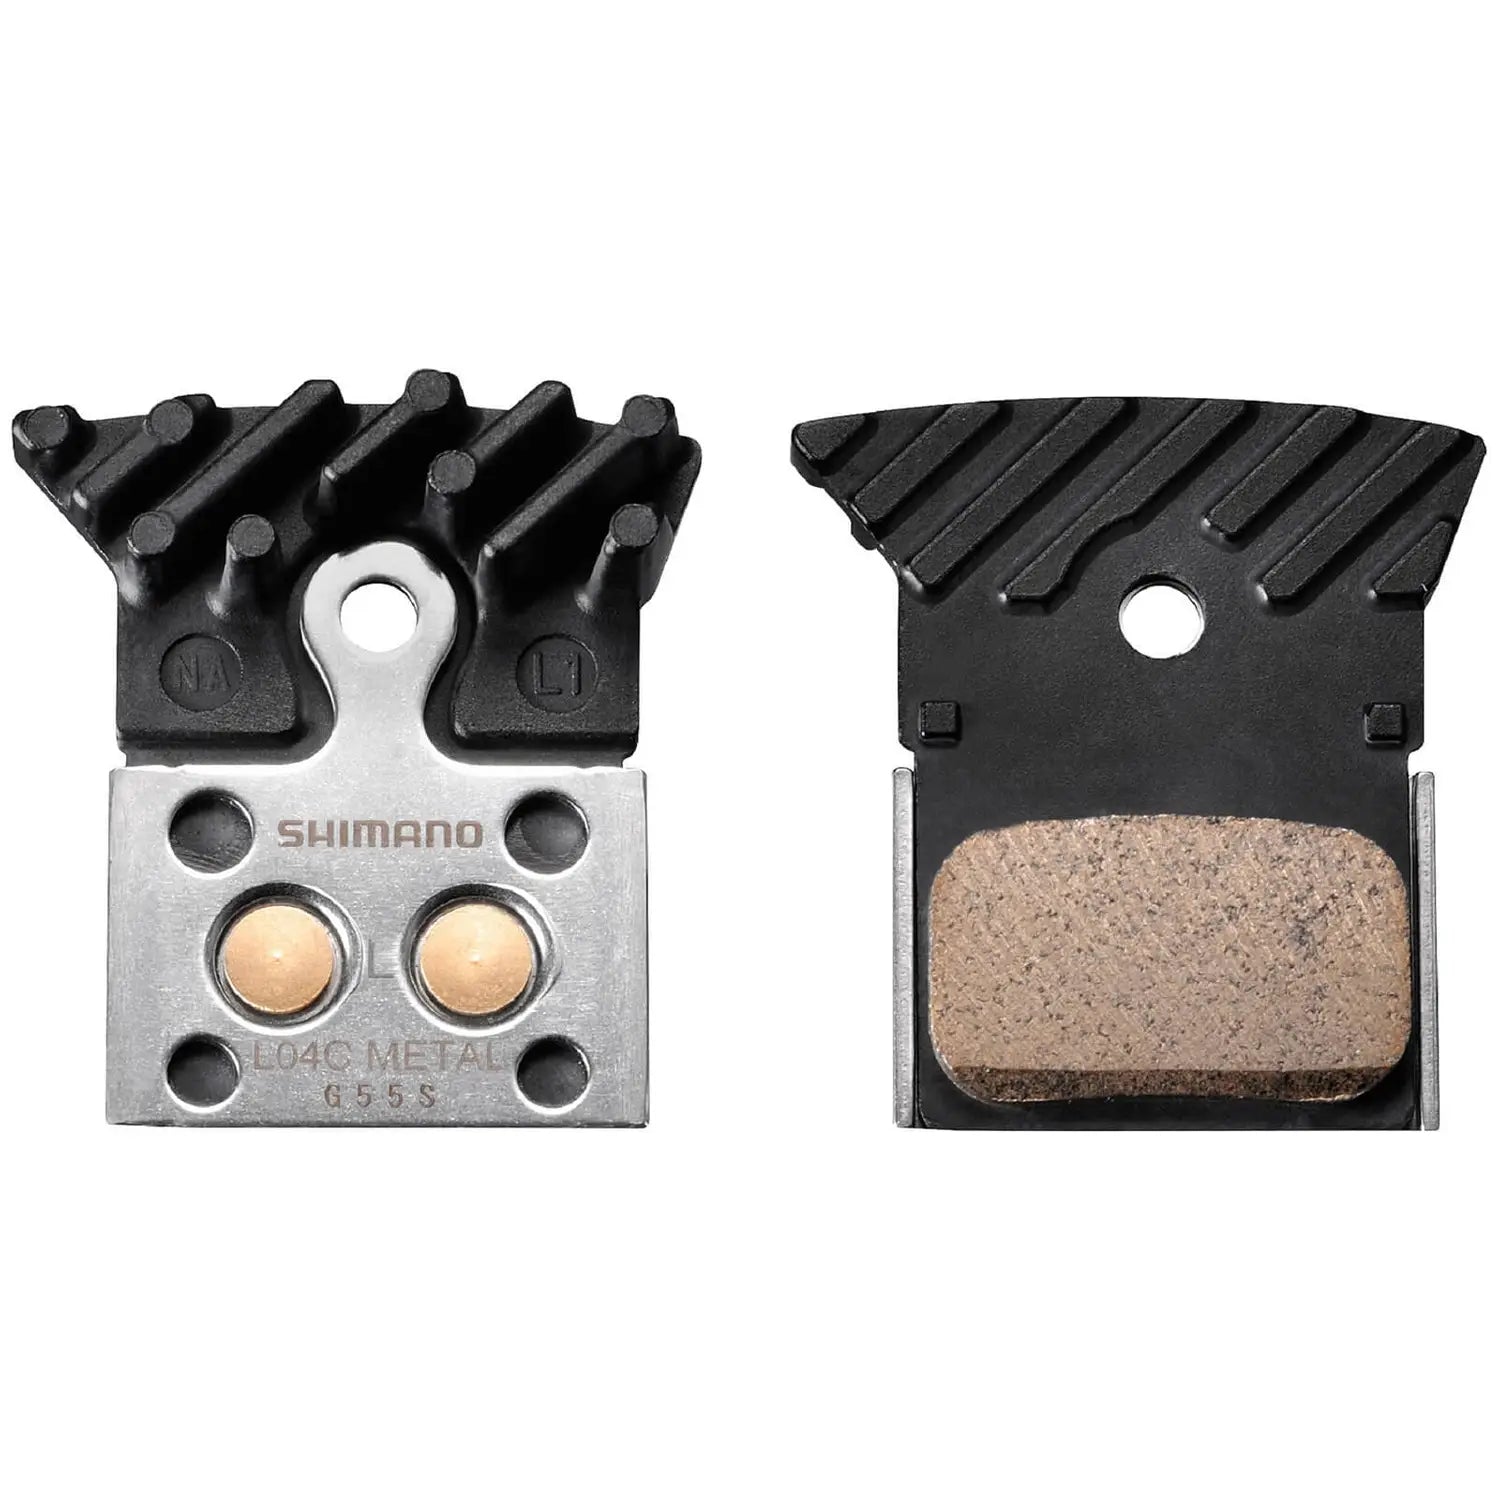 Shimano L04C Disc Brake Pads - Alloy Backed With Cooling Fins - Sintered